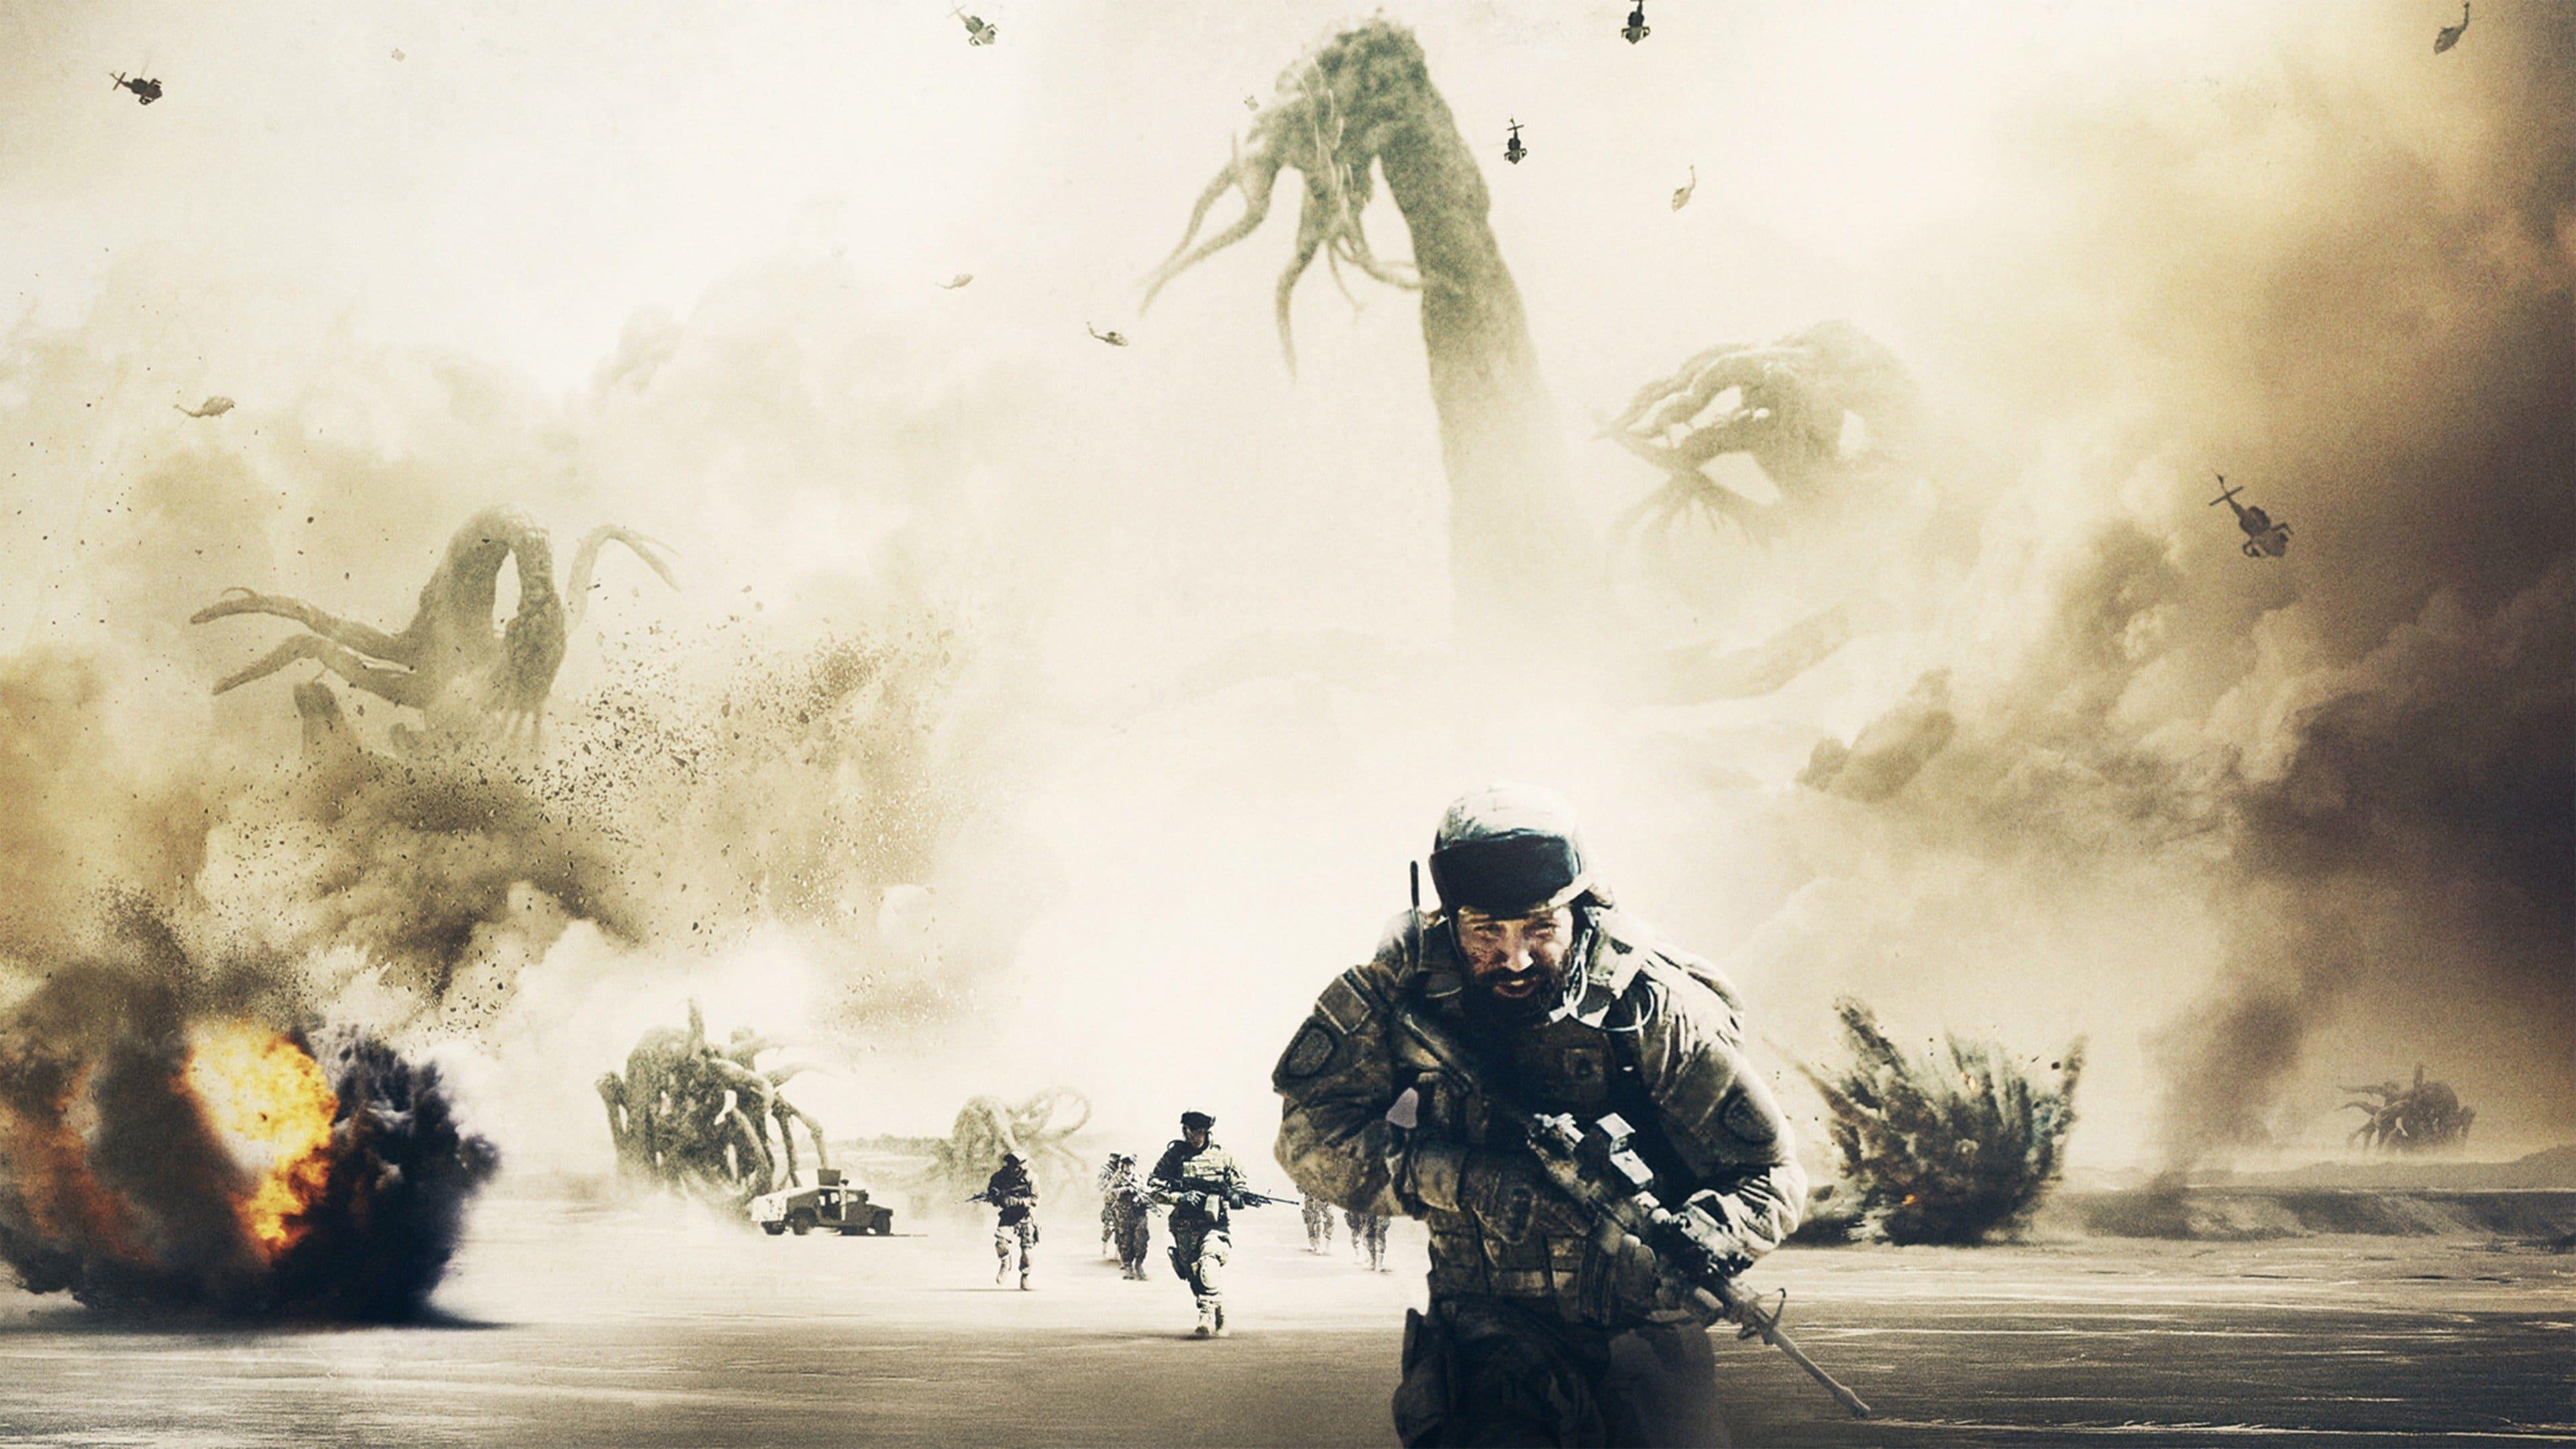 Monsters: Dark Continent backdrop